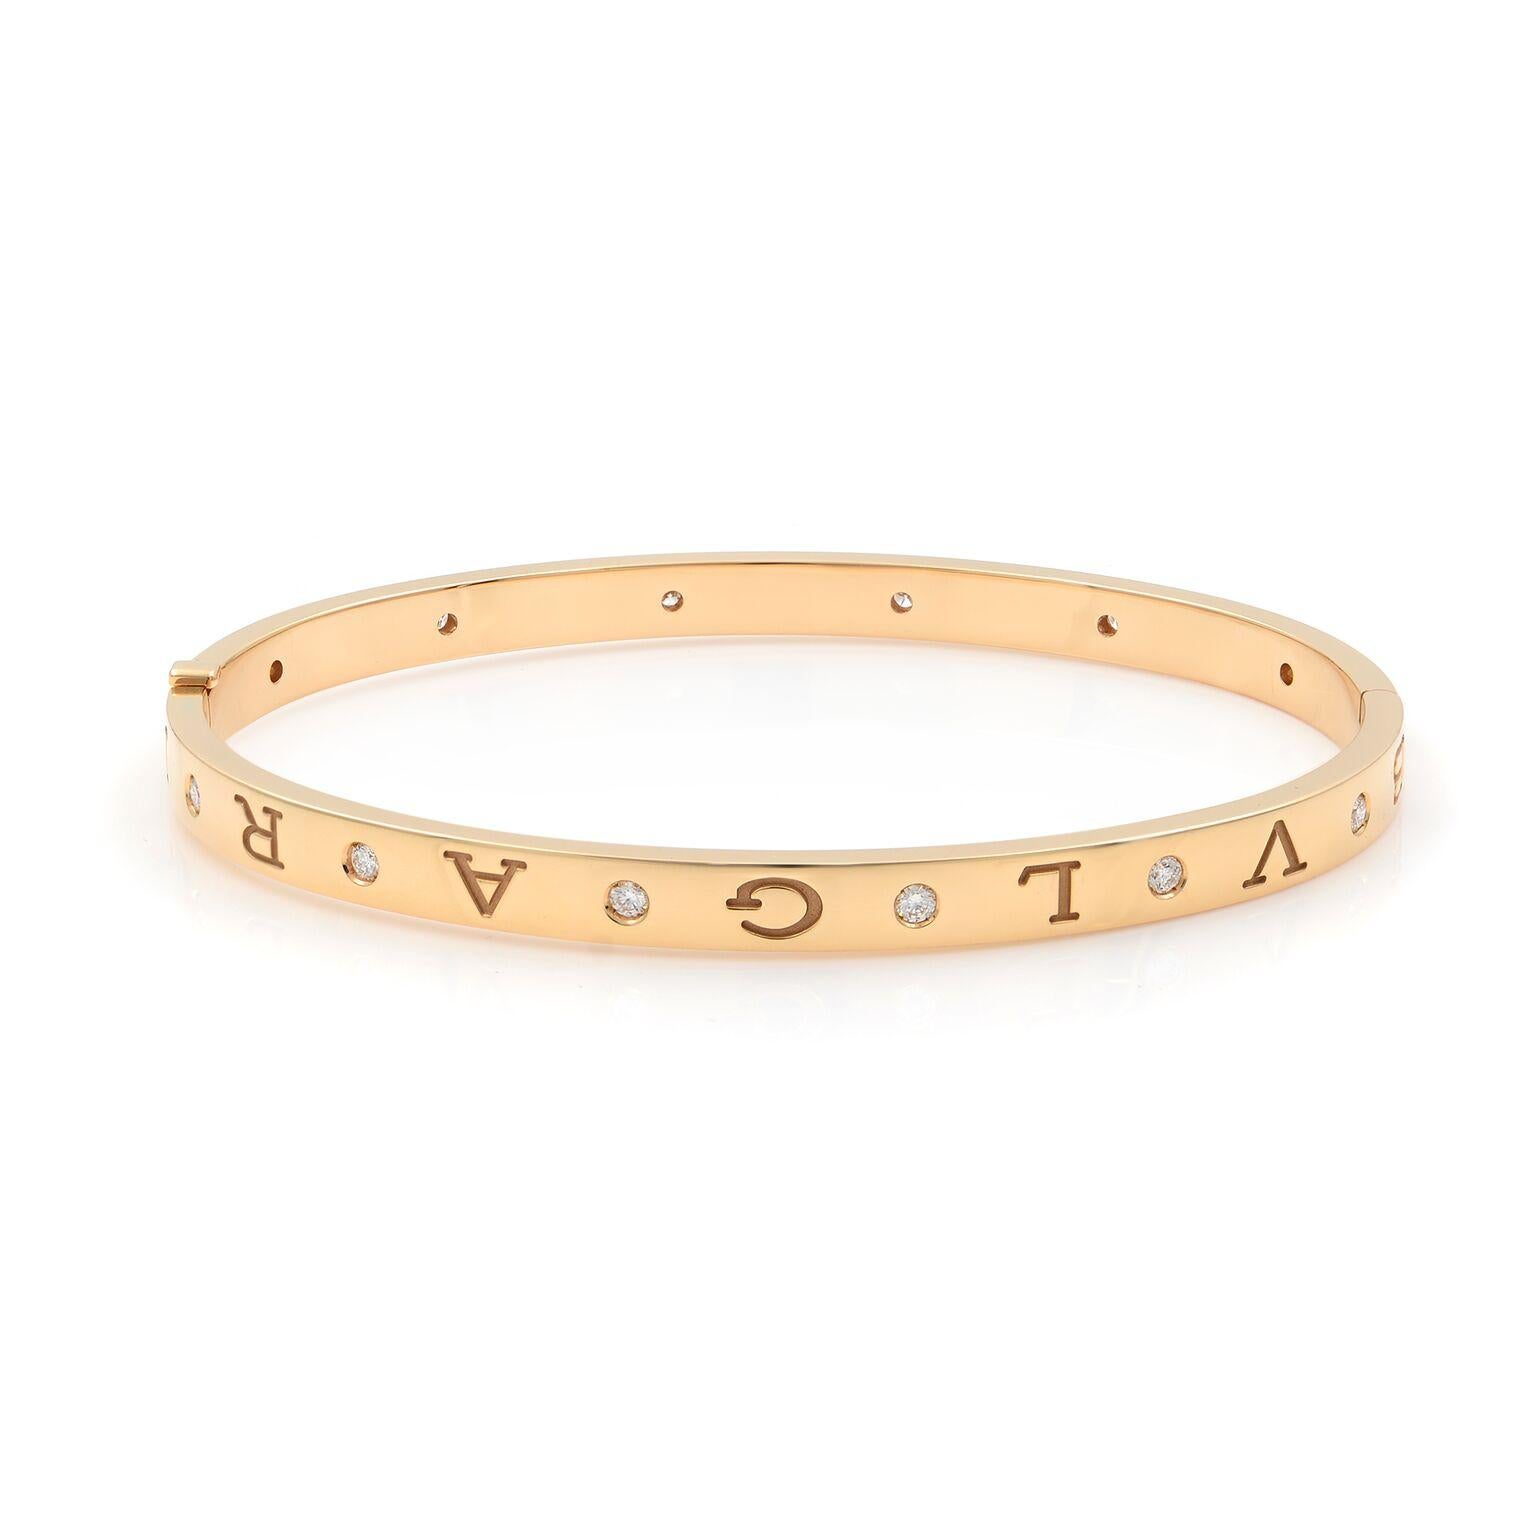 A classic BVLGARI BVLGARI 18 kt rose gold bangle bracelet set with 12 round cut diamonds totaling 0.47 cts. This bracelet is an effervescent, contemporary statement of classiness. Made in Italy. 
Condition: new without tags. Comes with box and